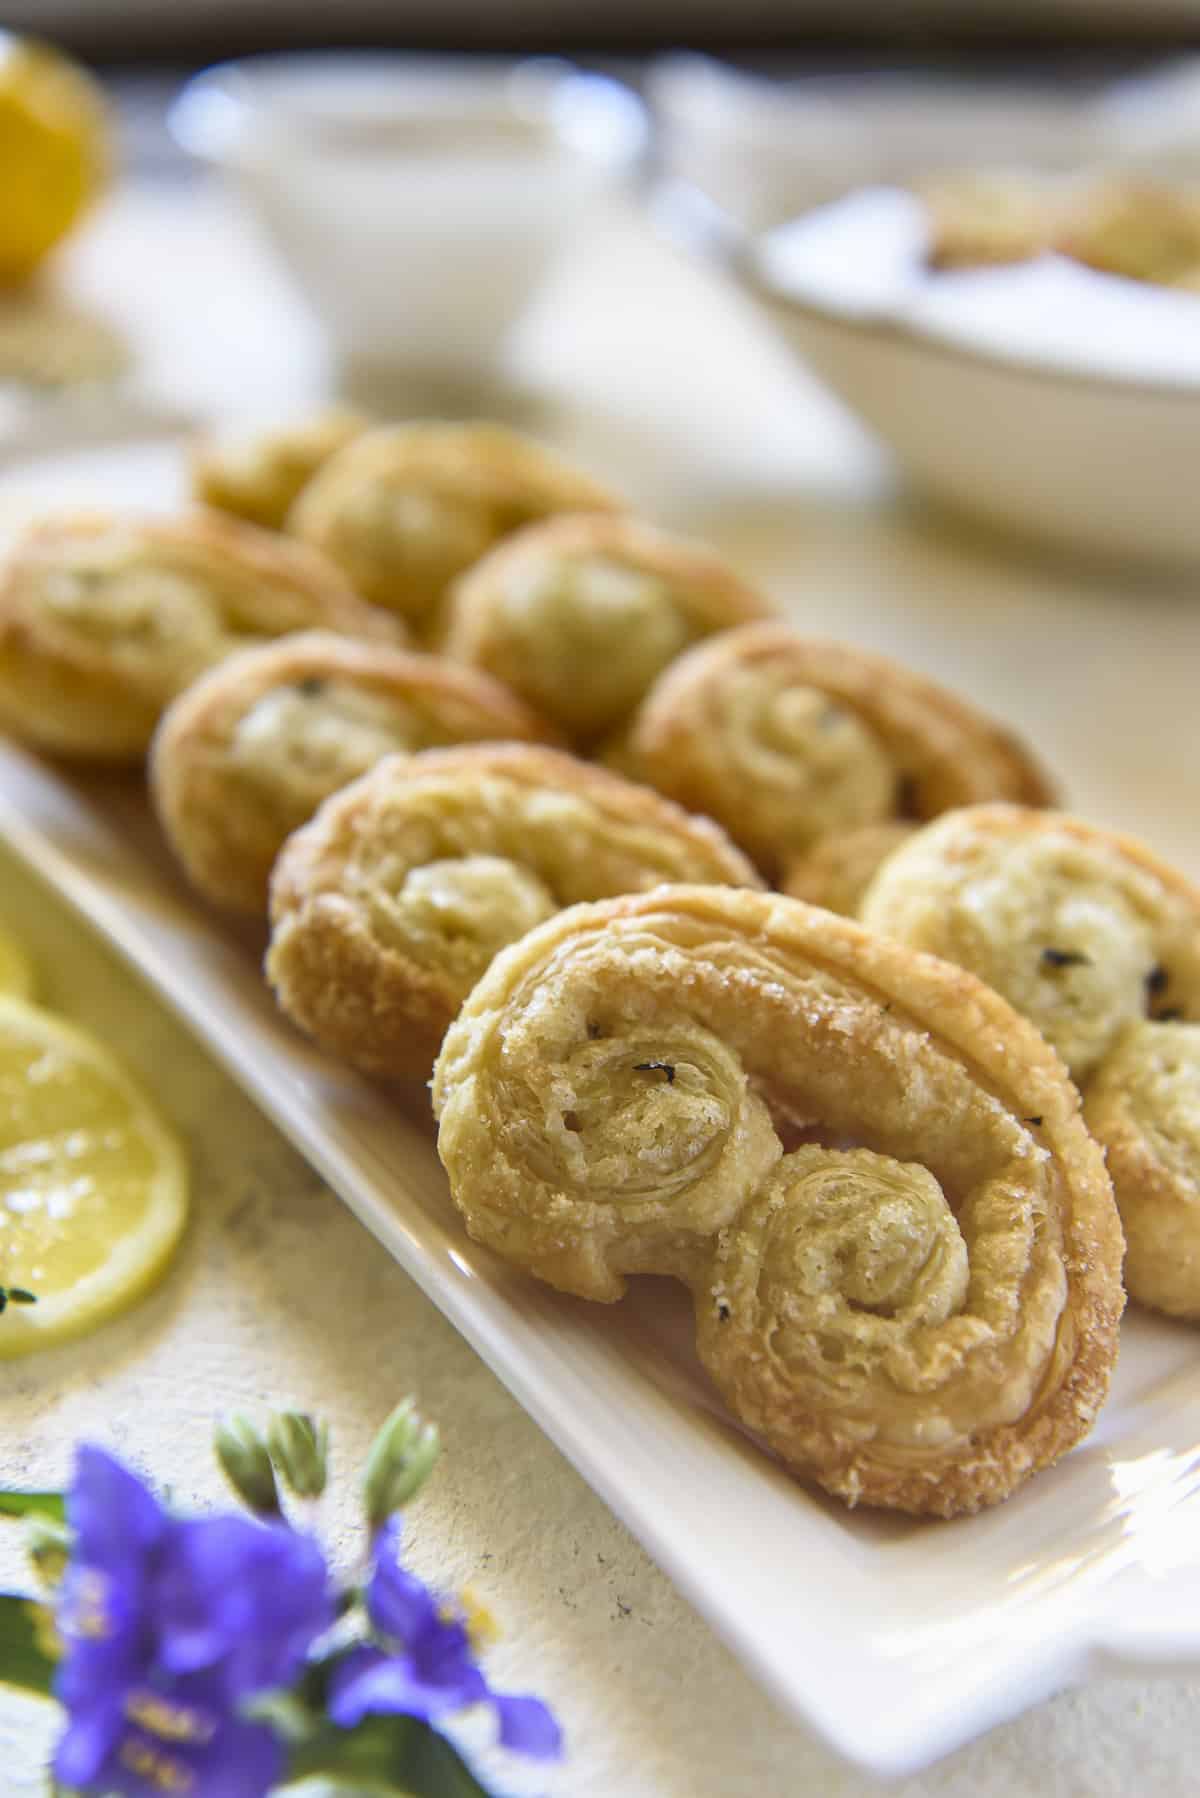 A platter of freshly baked lemon thyme palmiers garnished with lemon slices and flowers on a light-colored table.